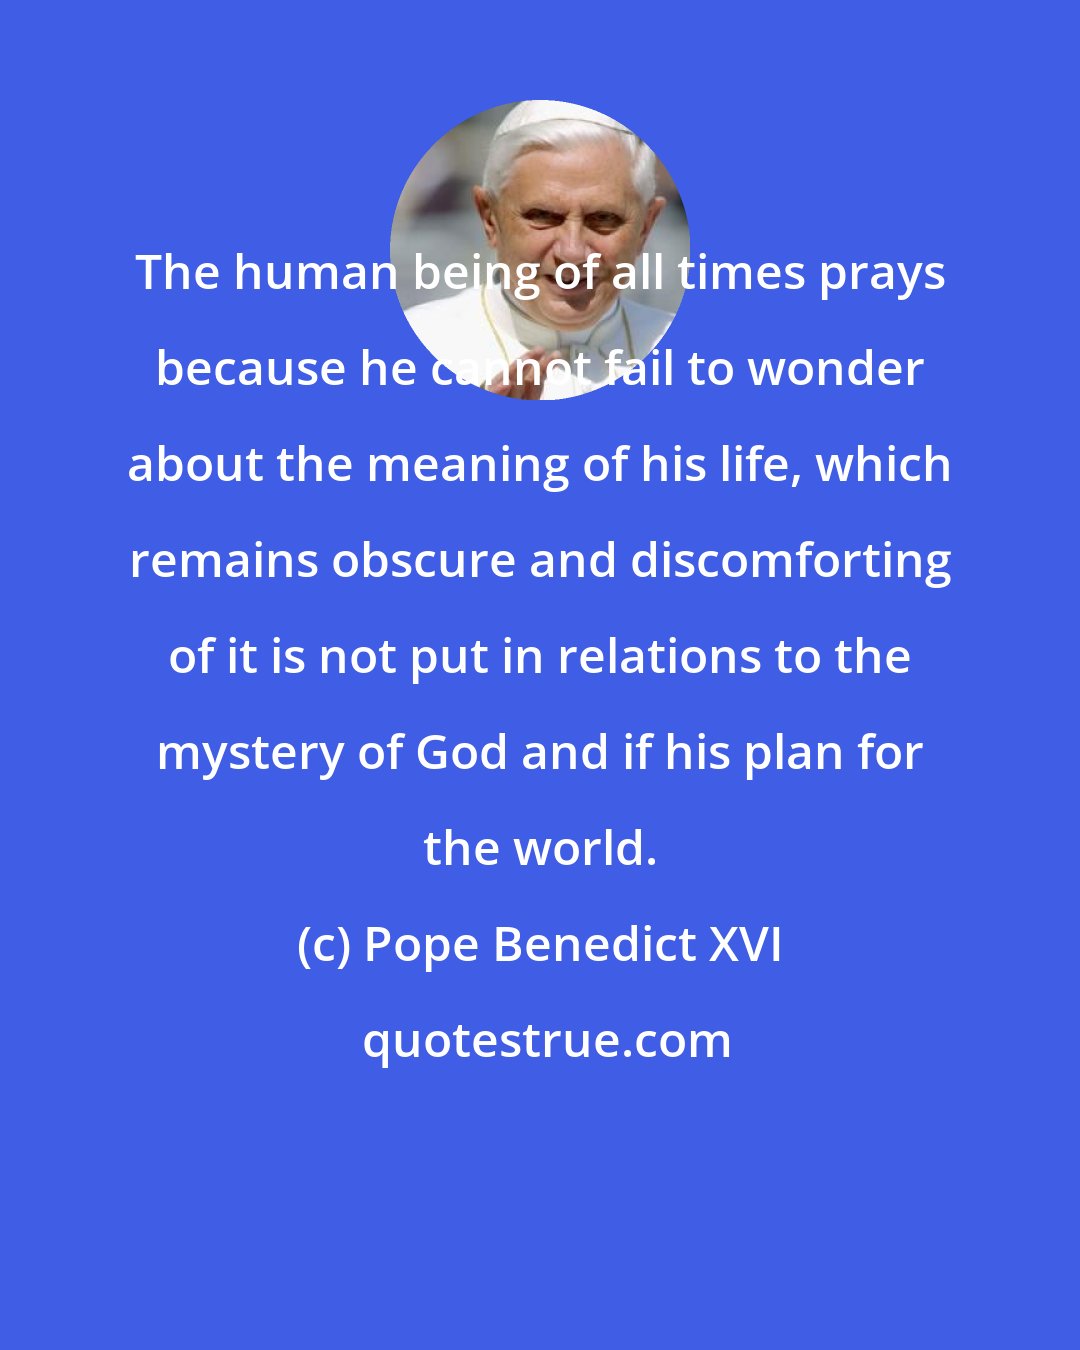 Pope Benedict XVI: The human being of all times prays because he cannot fail to wonder about the meaning of his life, which remains obscure and discomforting of it is not put in relations to the mystery of God and if his plan for the world.